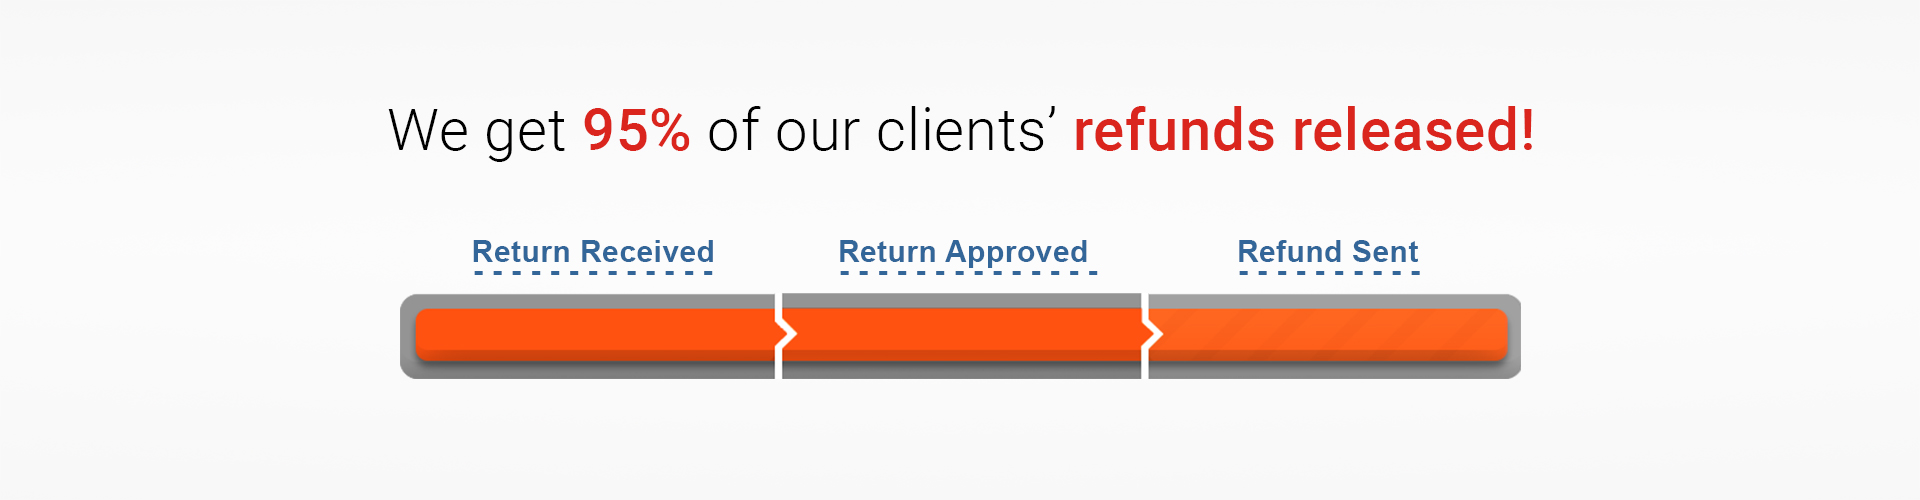 We get 95%  of our client's refunds released!